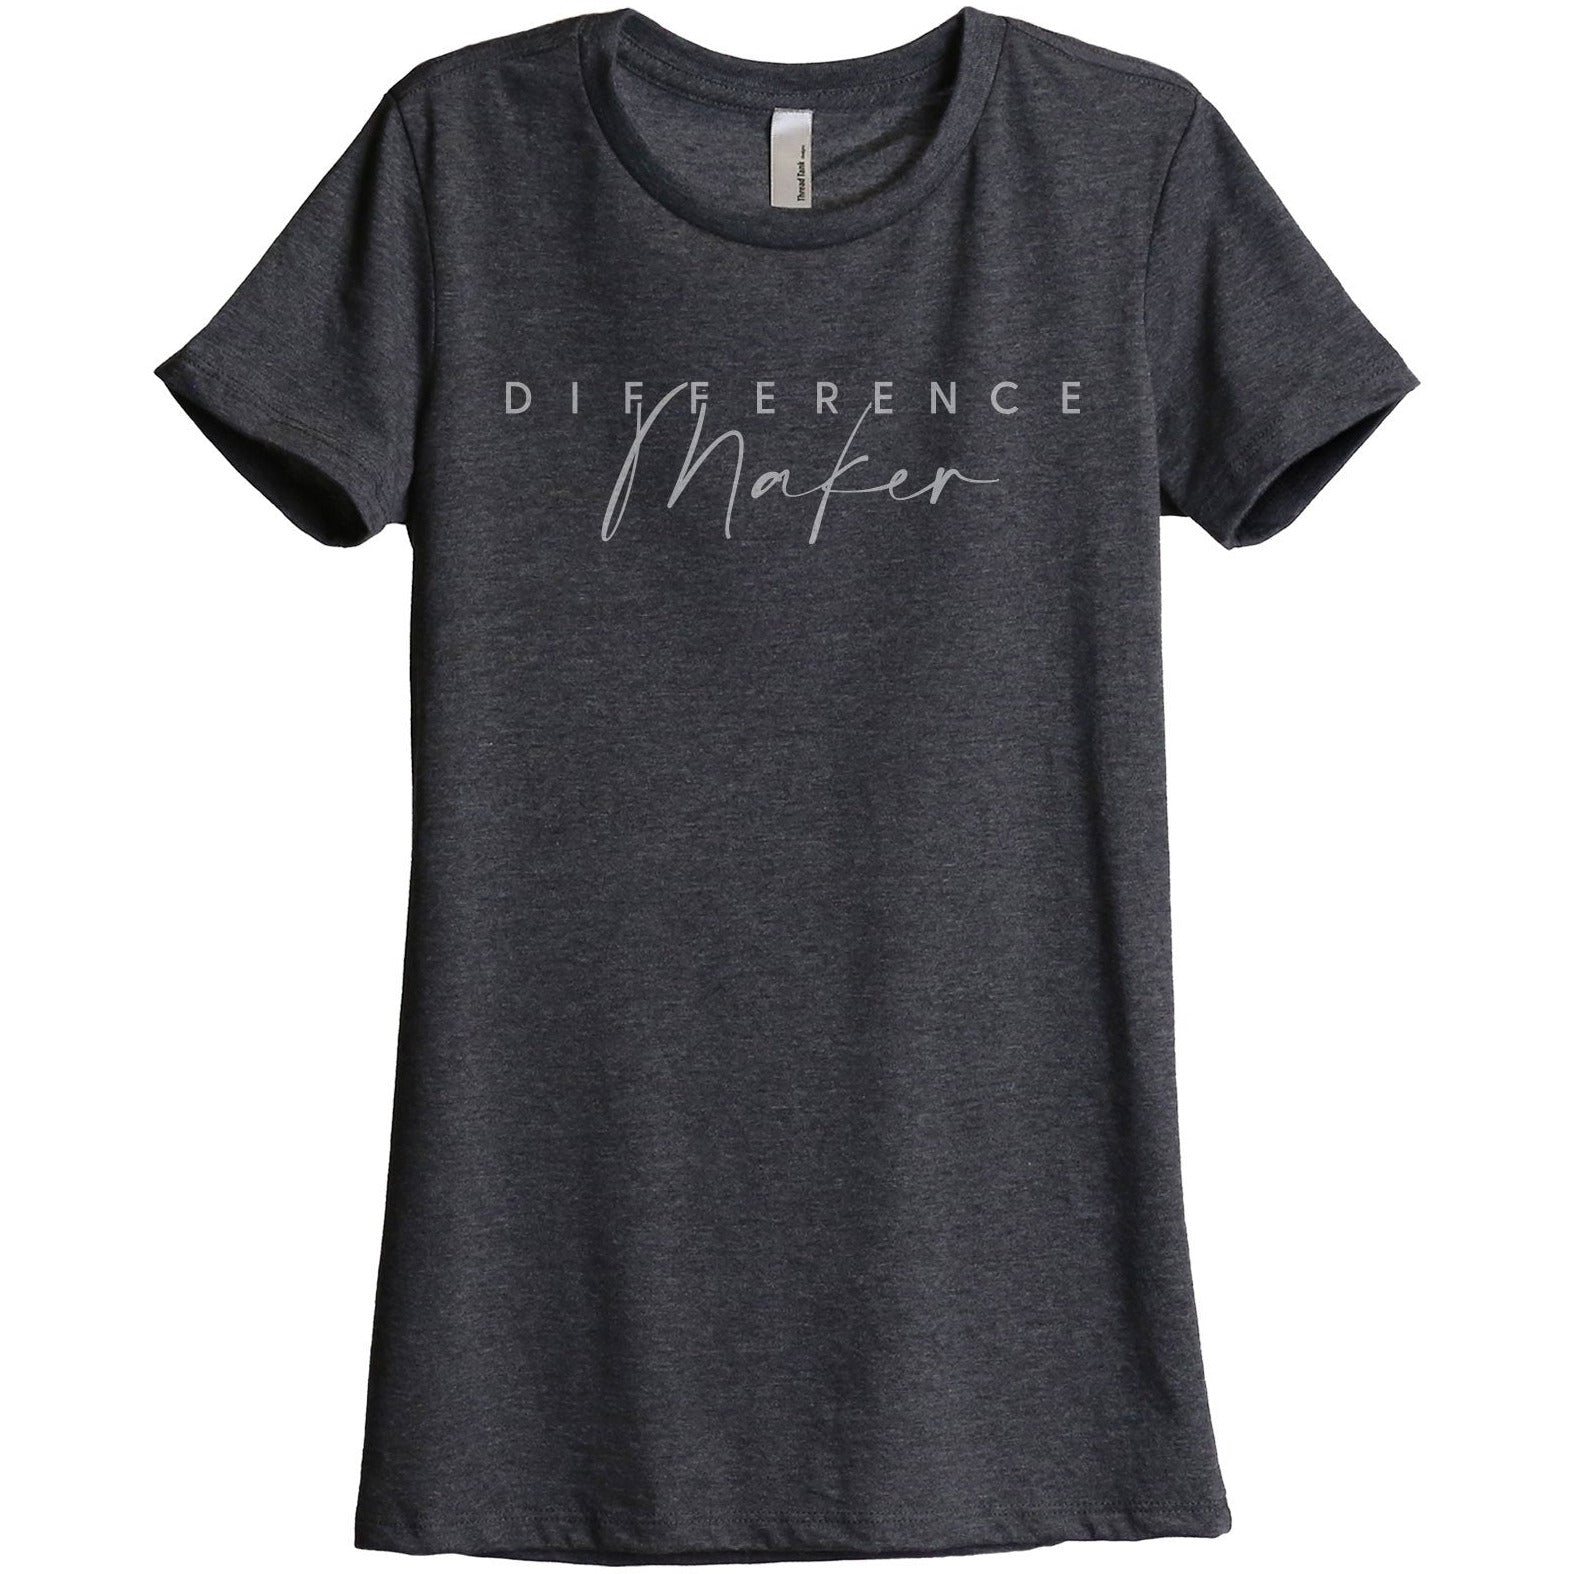 Difference Maker Women's Relaxed Crewneck T-Shirt Top Tee Charcoal Grey
